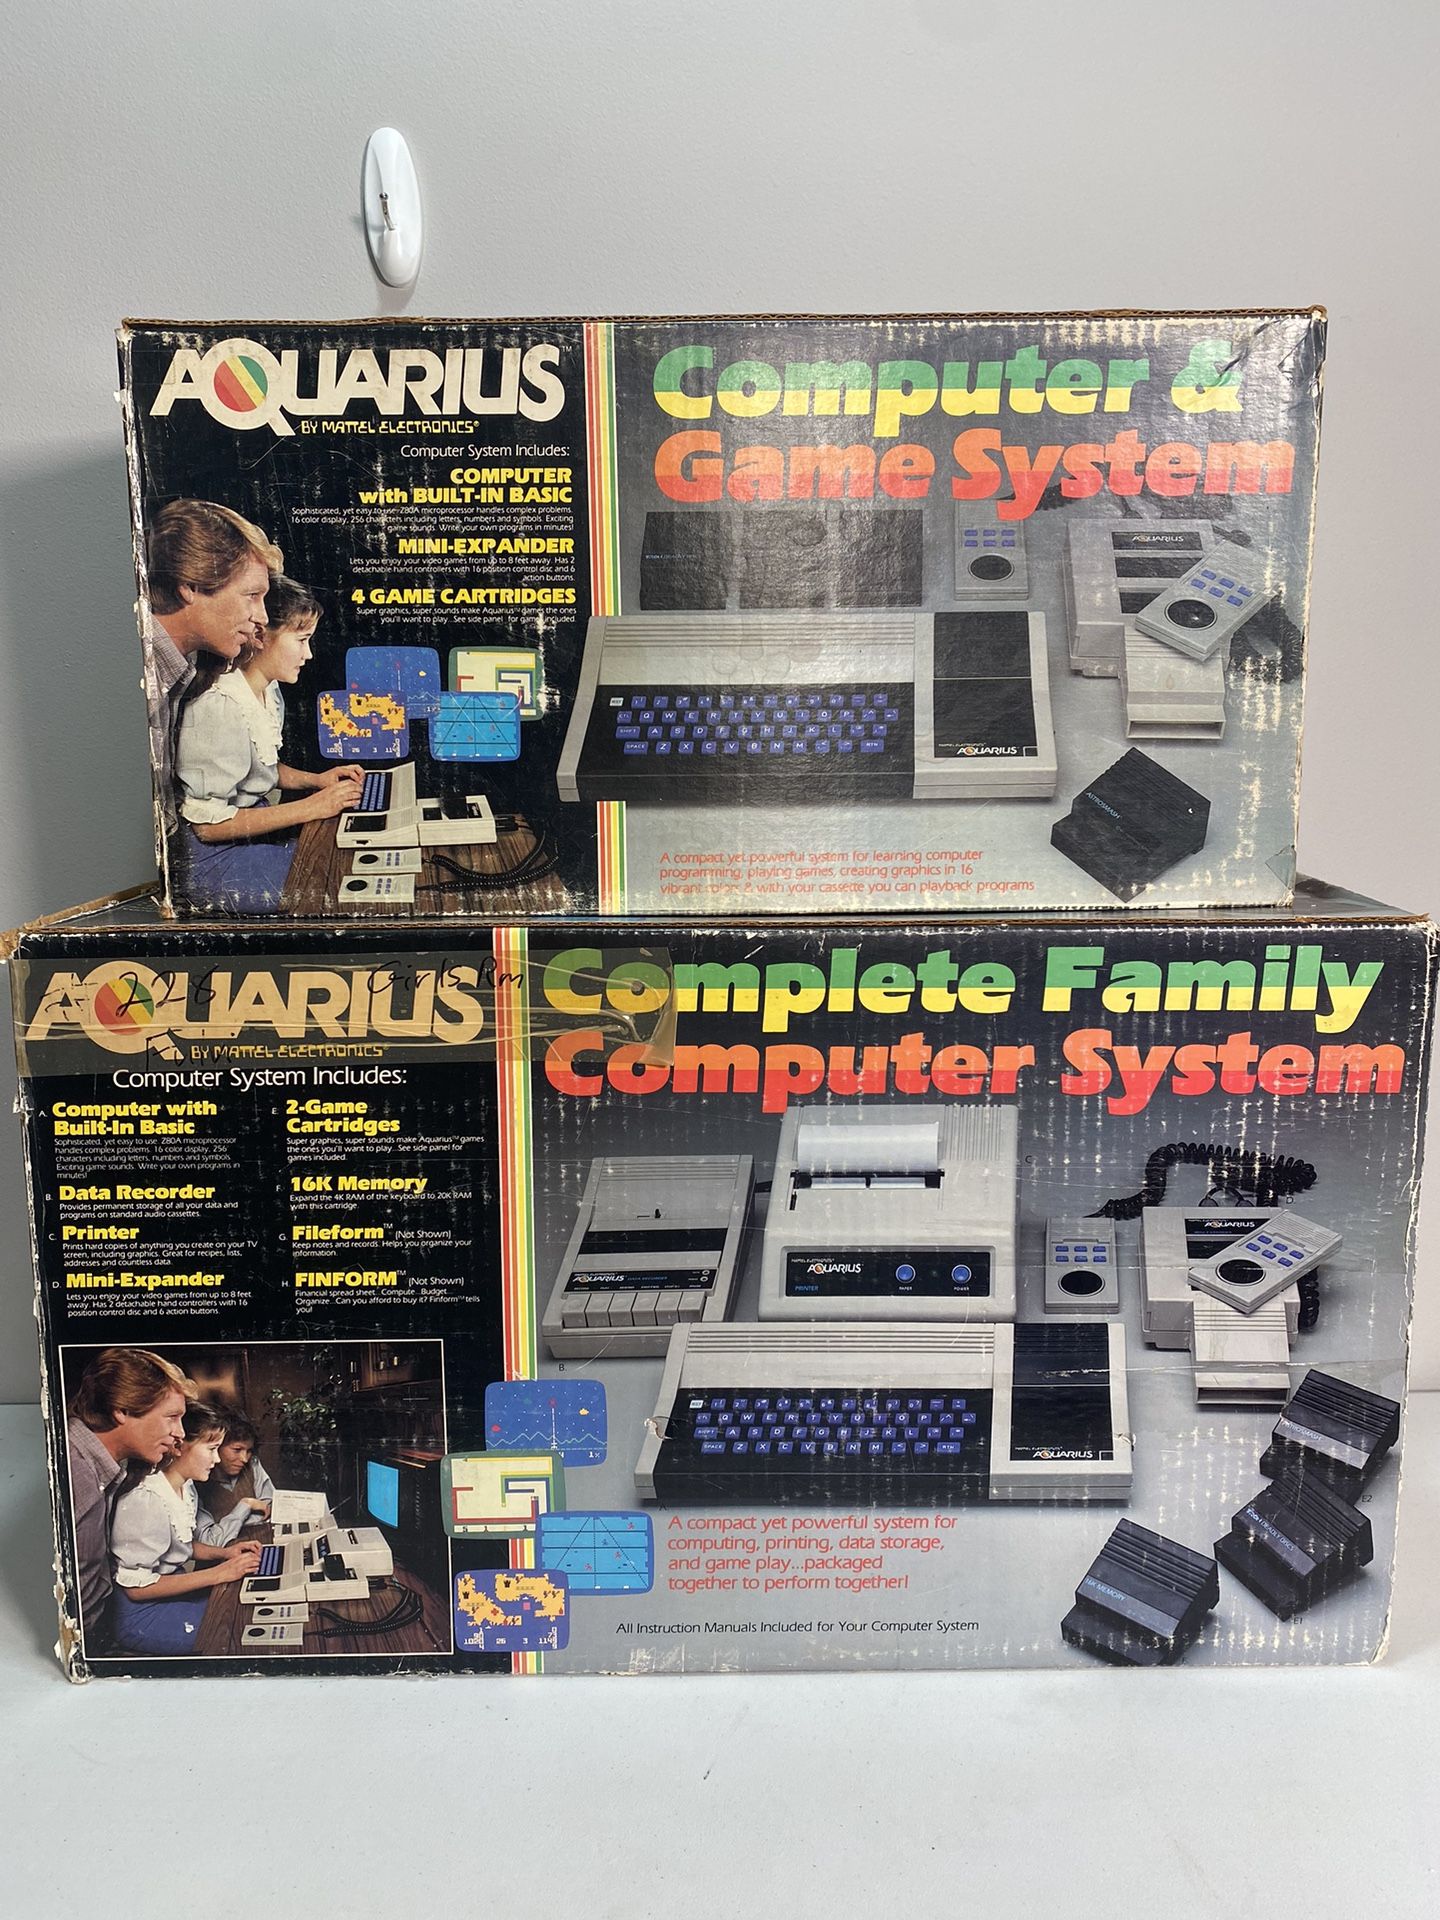 Aquarius Computer System & Game System by Mattel SET of 2